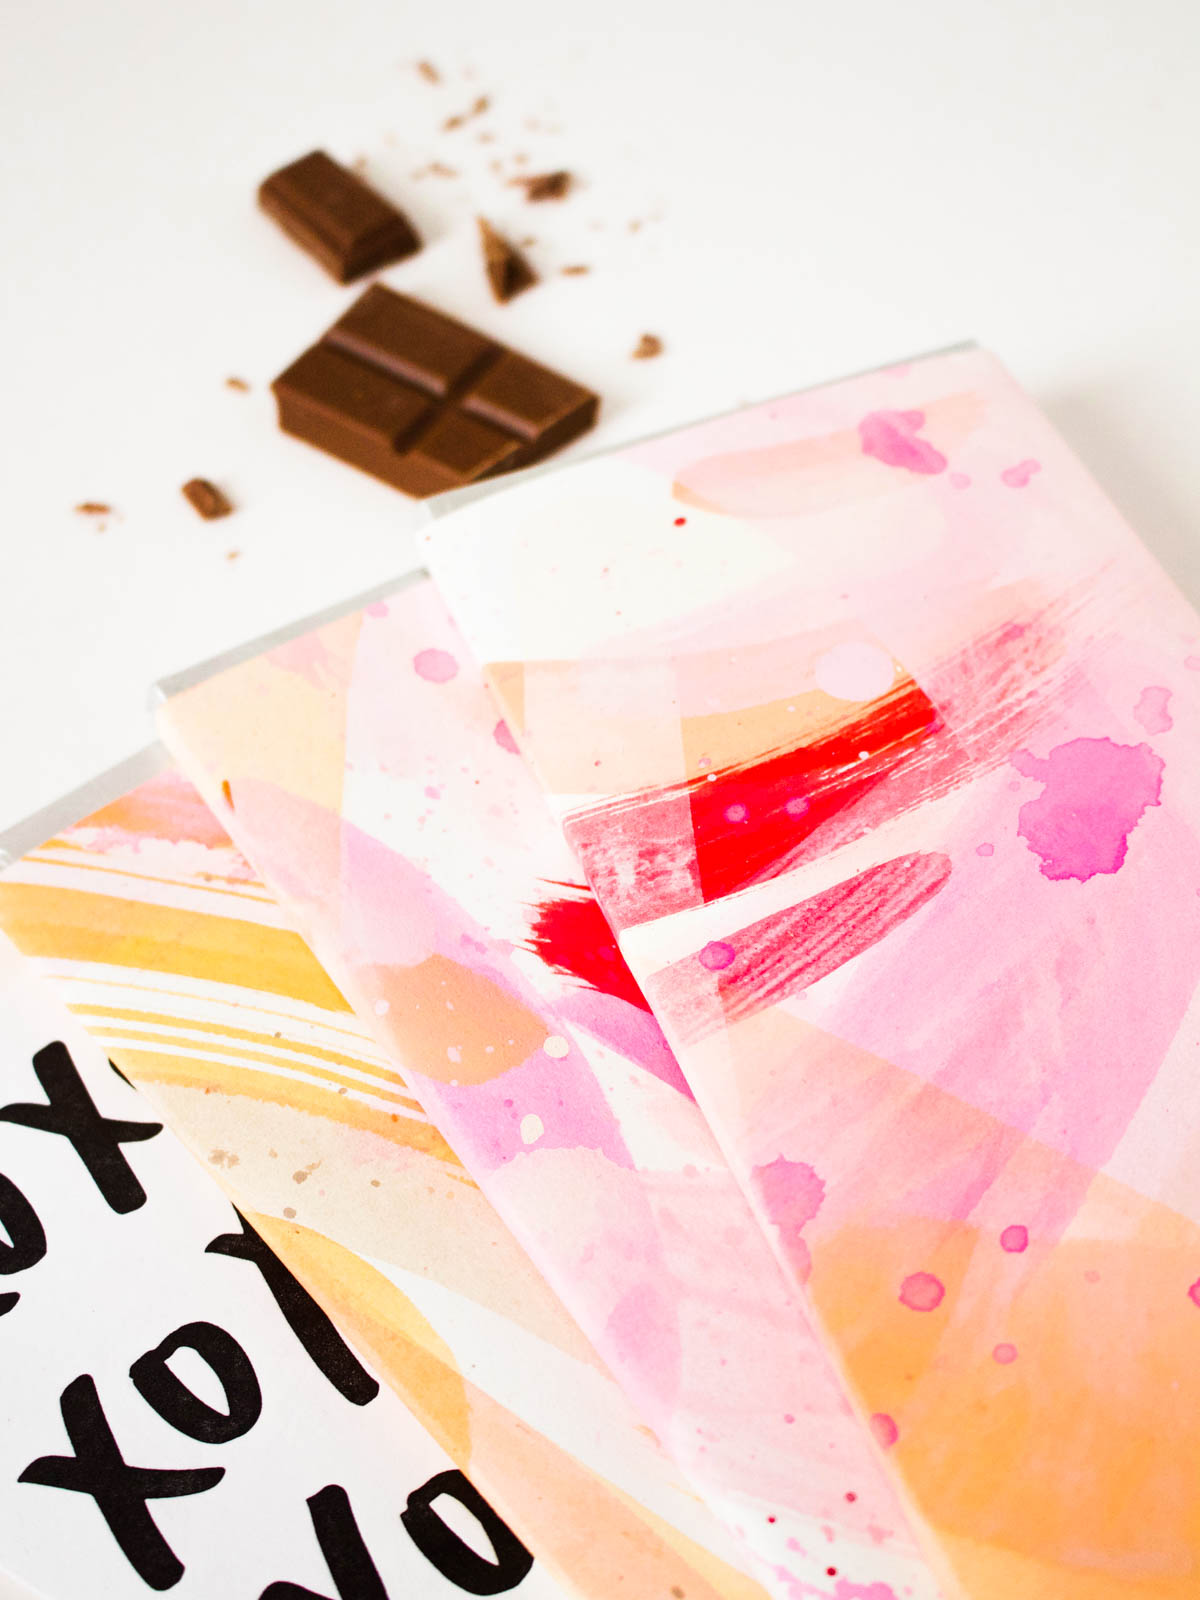 DIY Painted Chocolate Bars for Valentine's Day | Fish & Bull